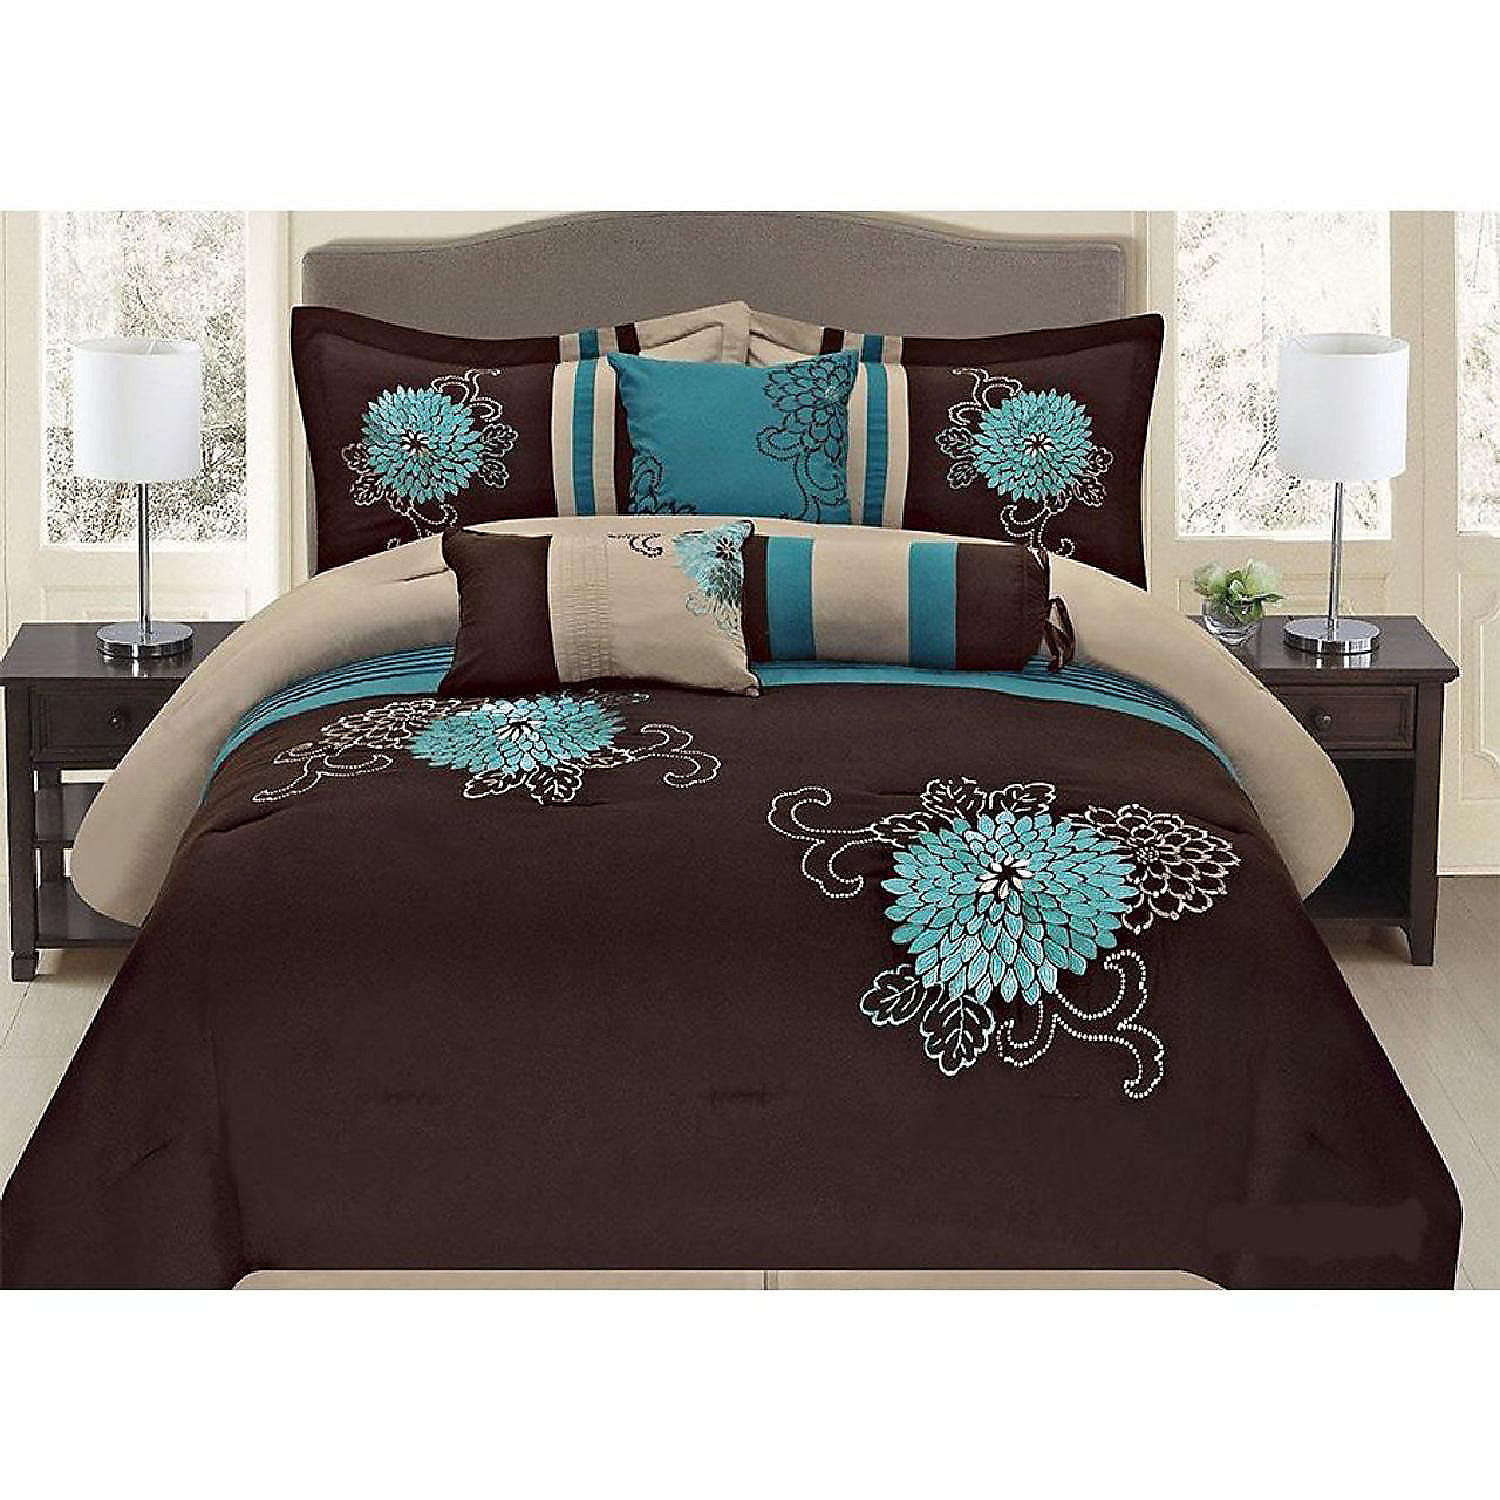 Update Teal Bedding King Review